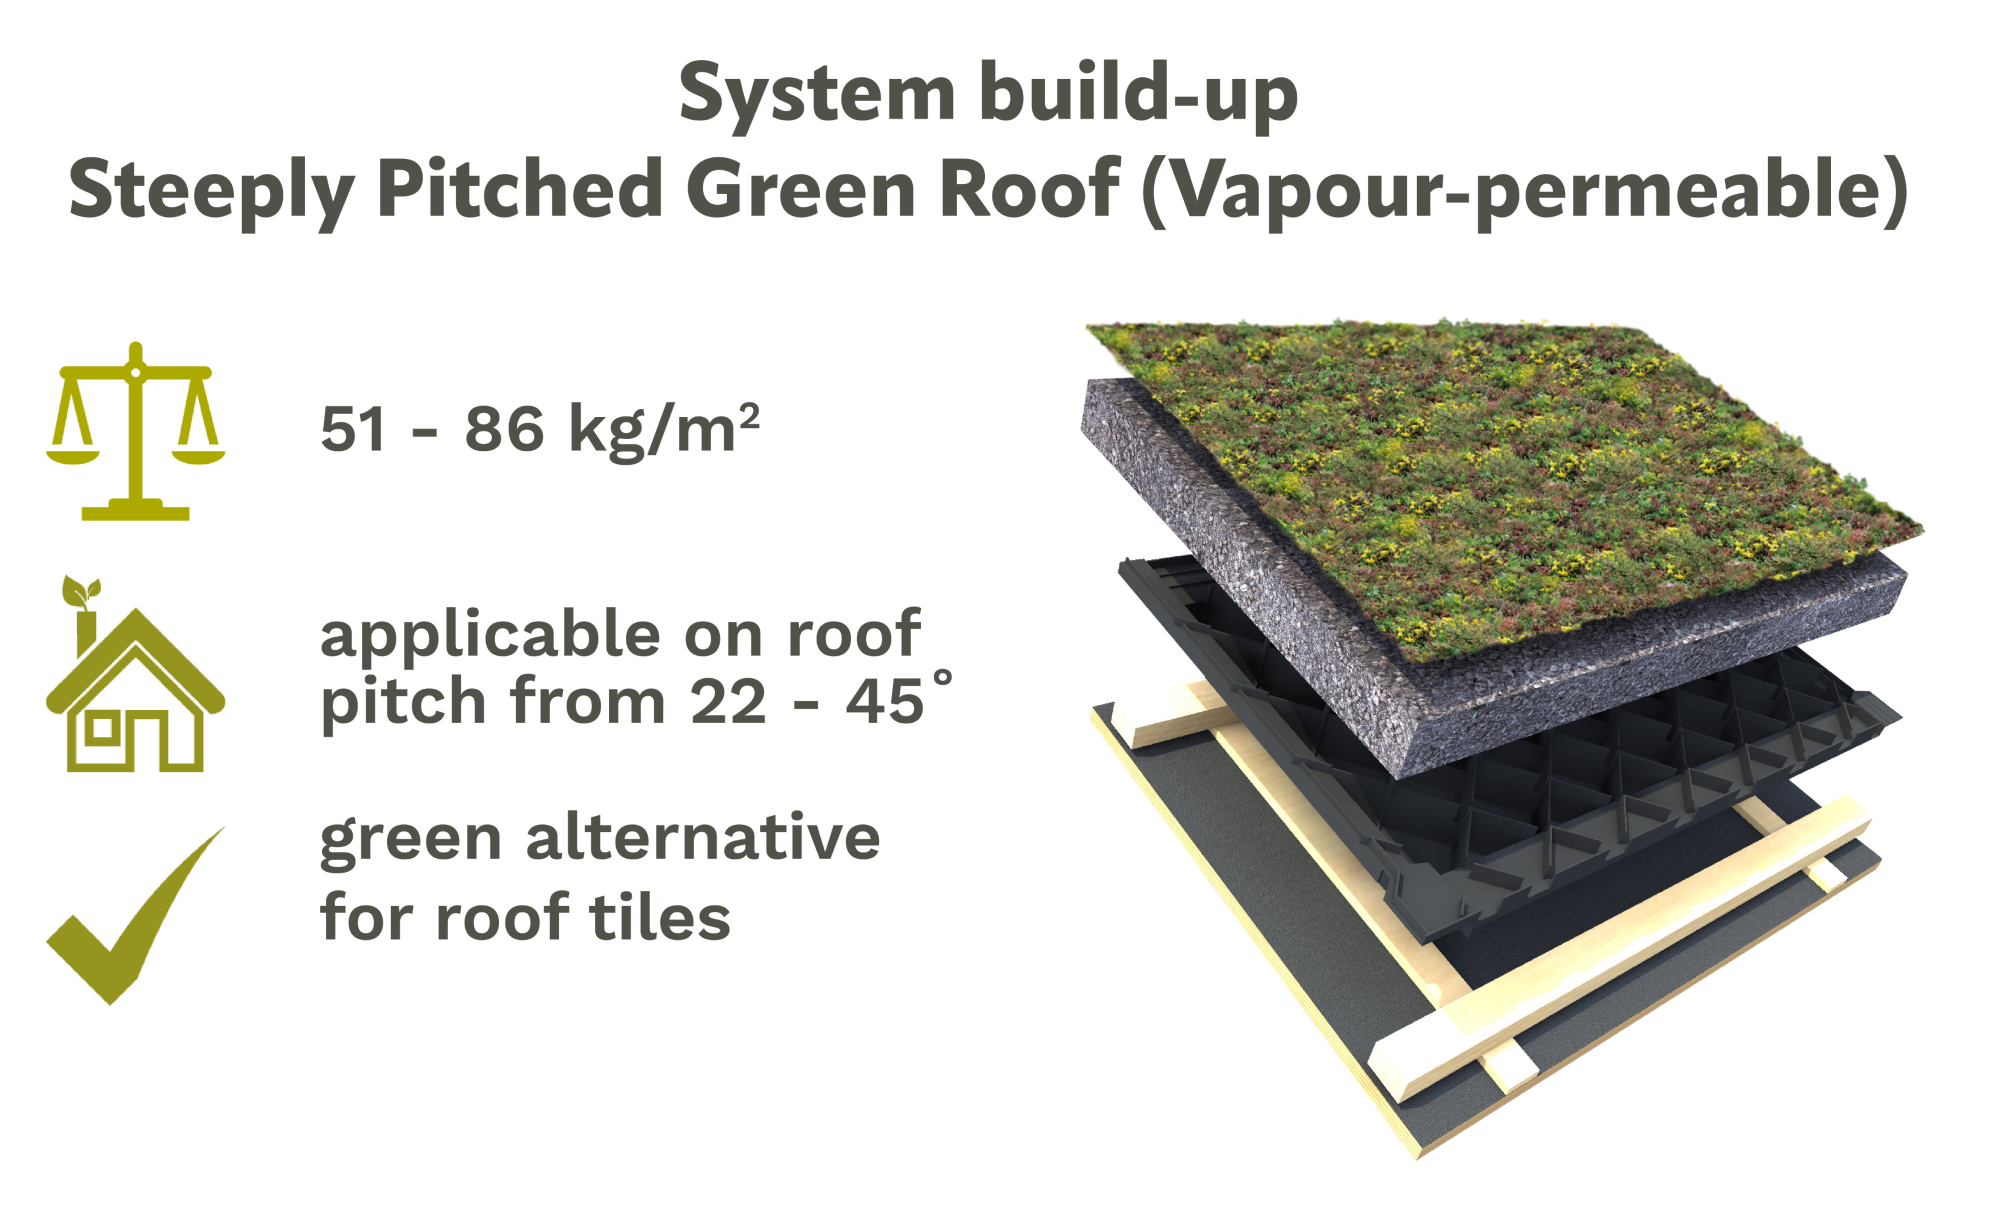 System Build-up vapour permeable steeply pitched green roof system